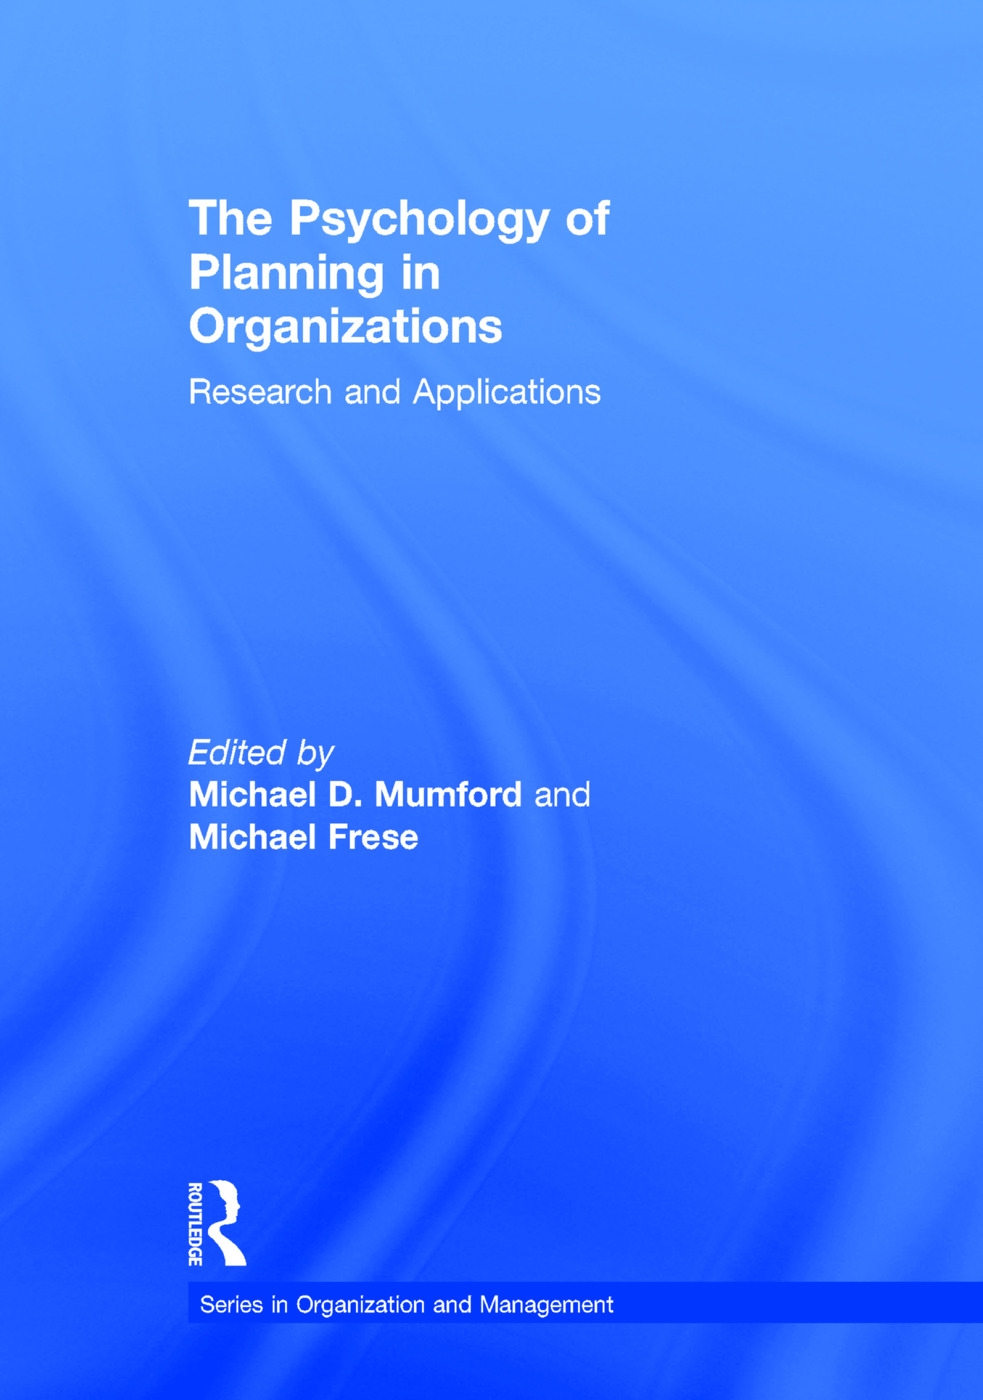 The Psychology of Planning in Organizations: Research and Applications